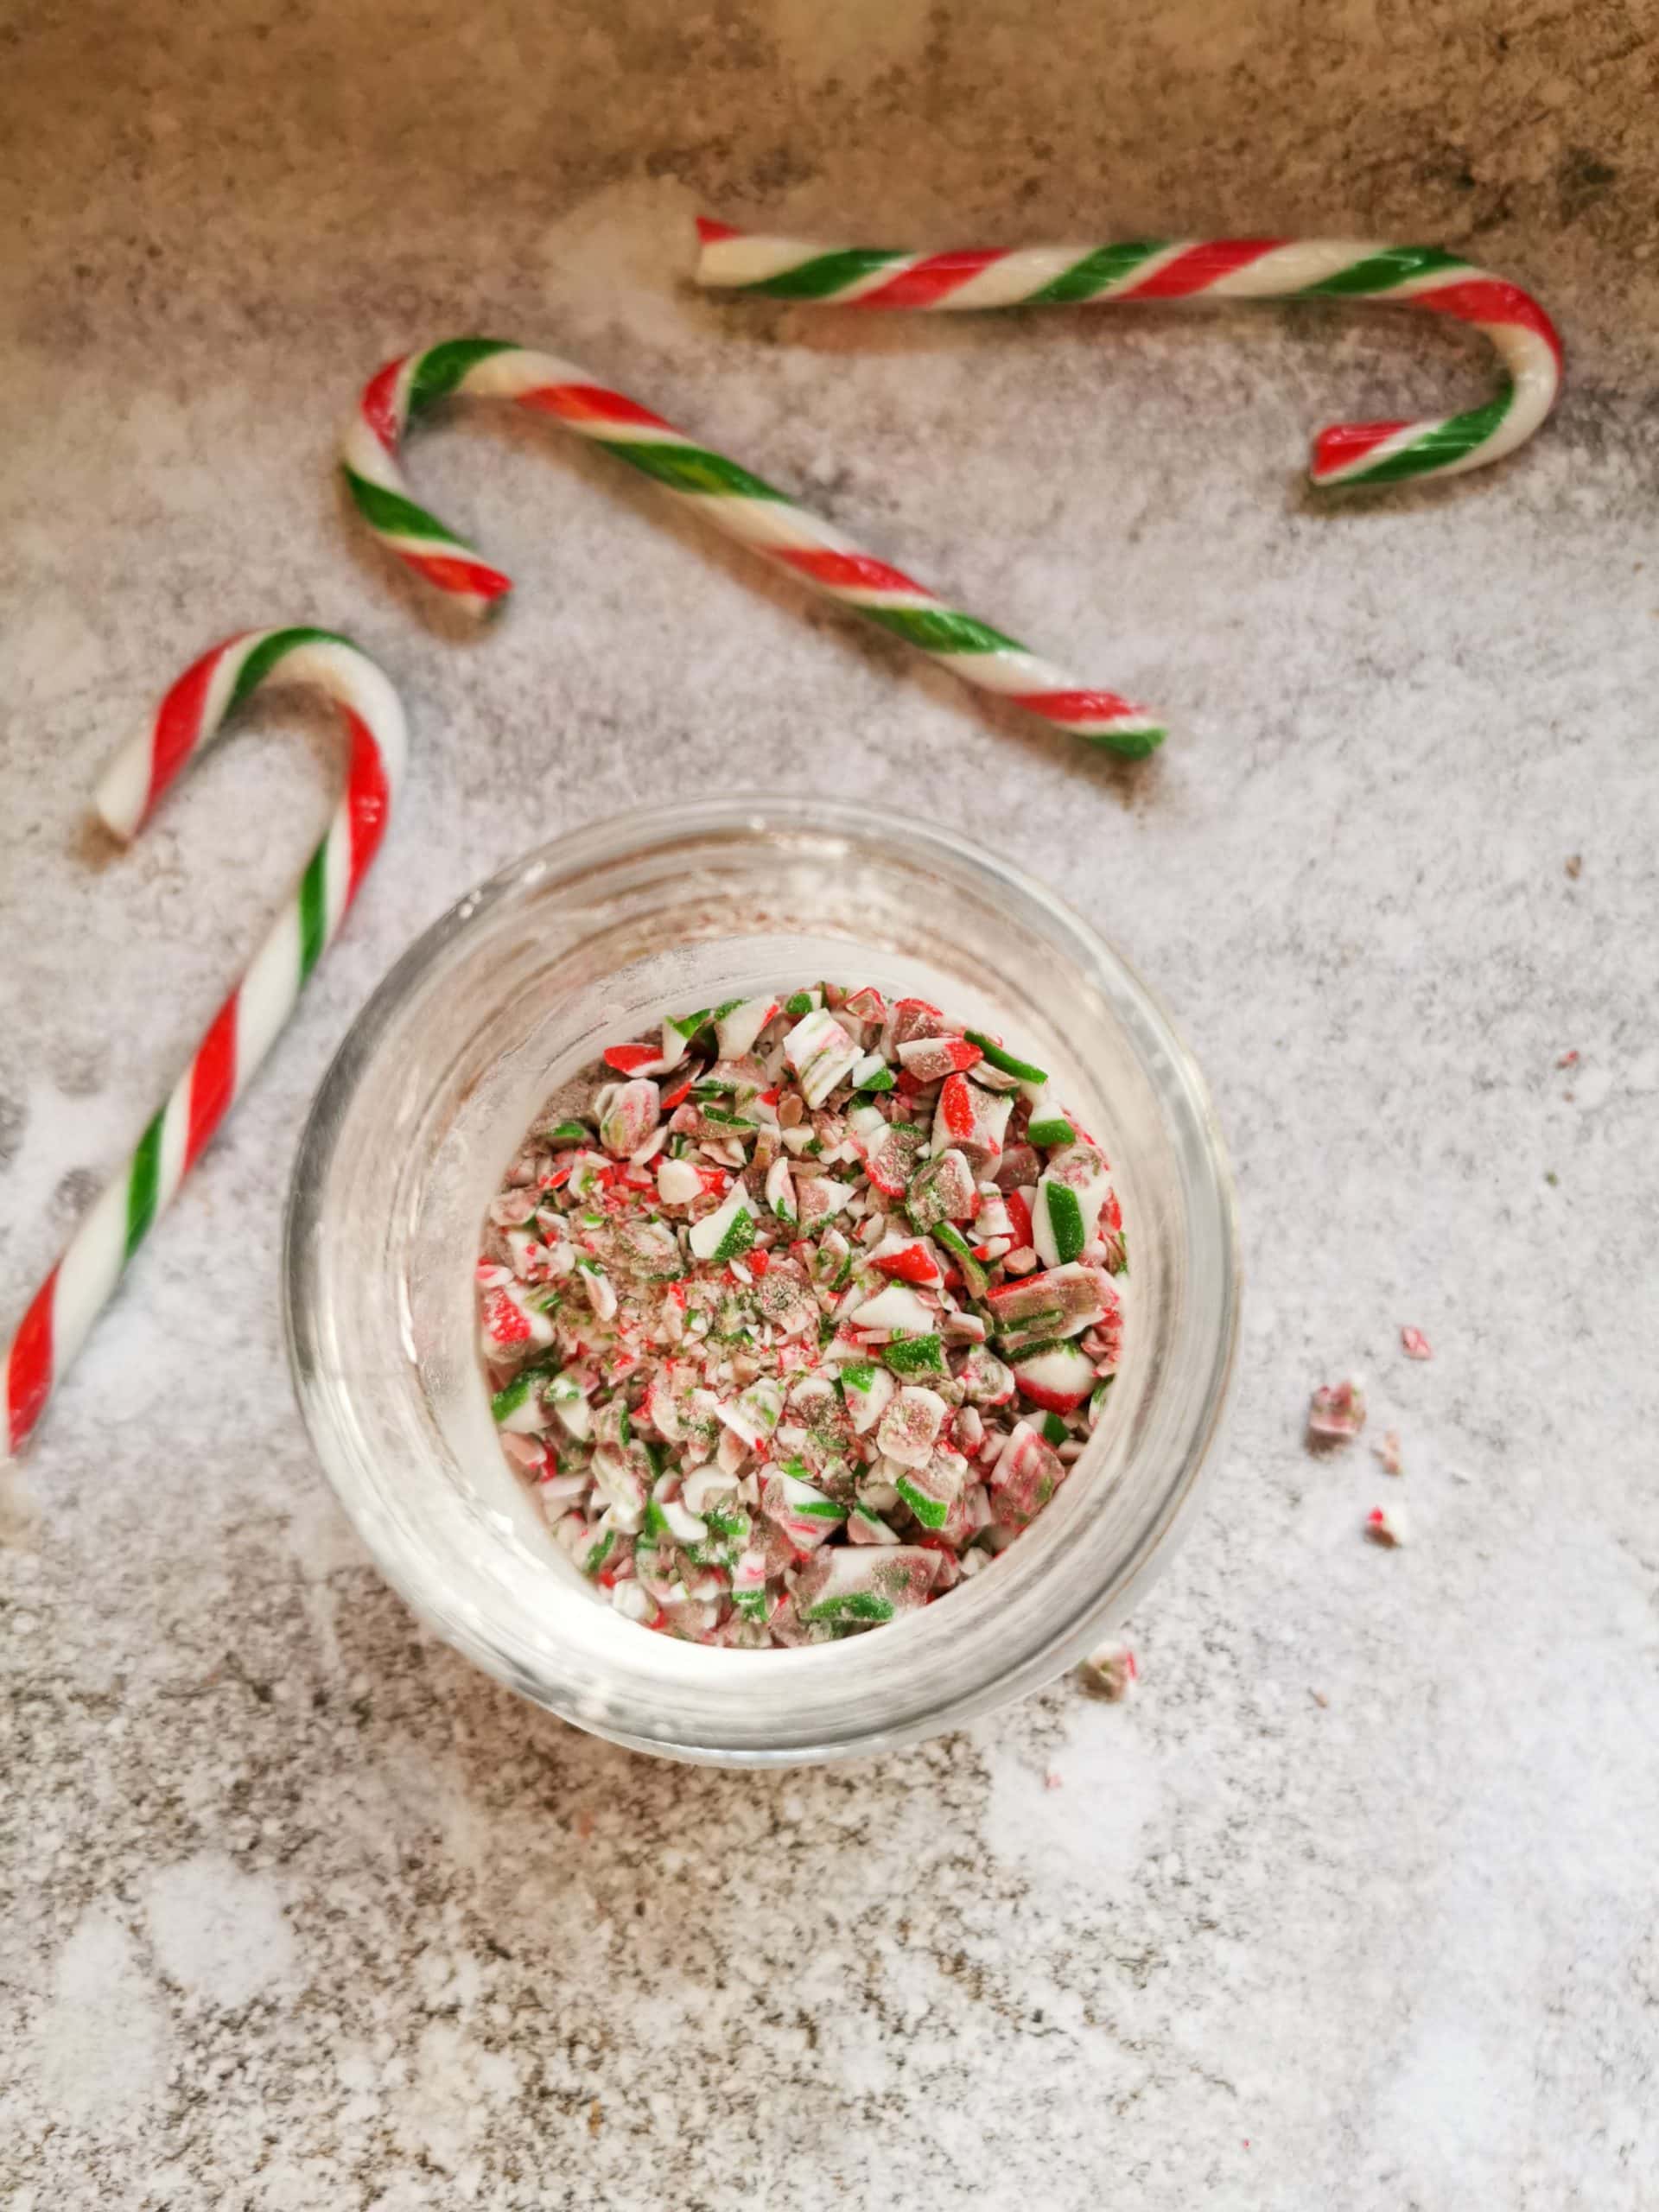 Crushed candy canes in a glass jar on a grey and white background 